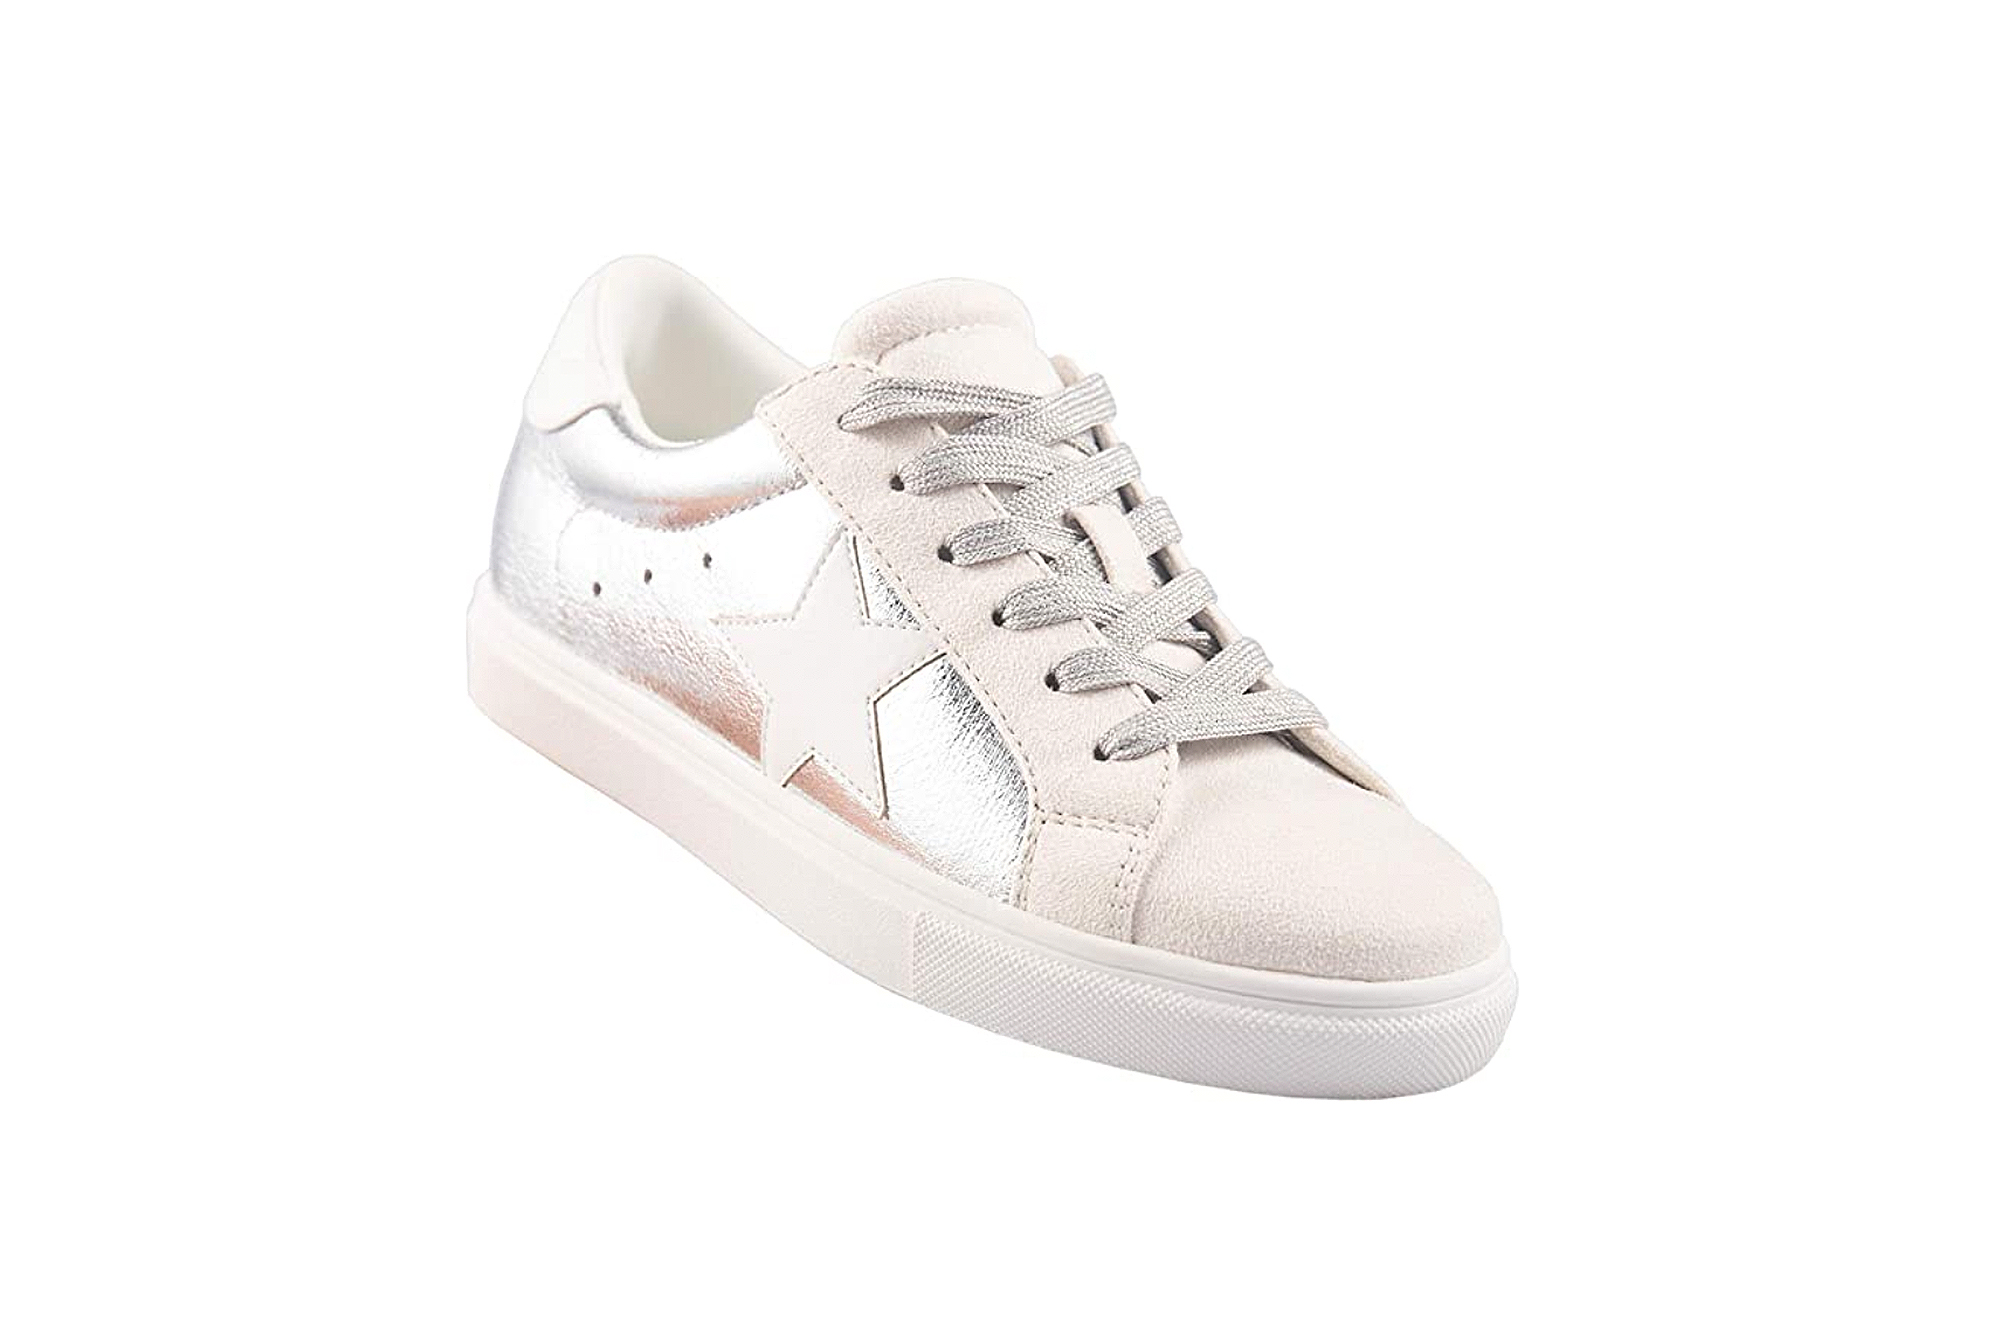 PARTY Women's Fashion Star Sneaker Lace Up Low Top Comfortable Cushioned Walking Shoes 